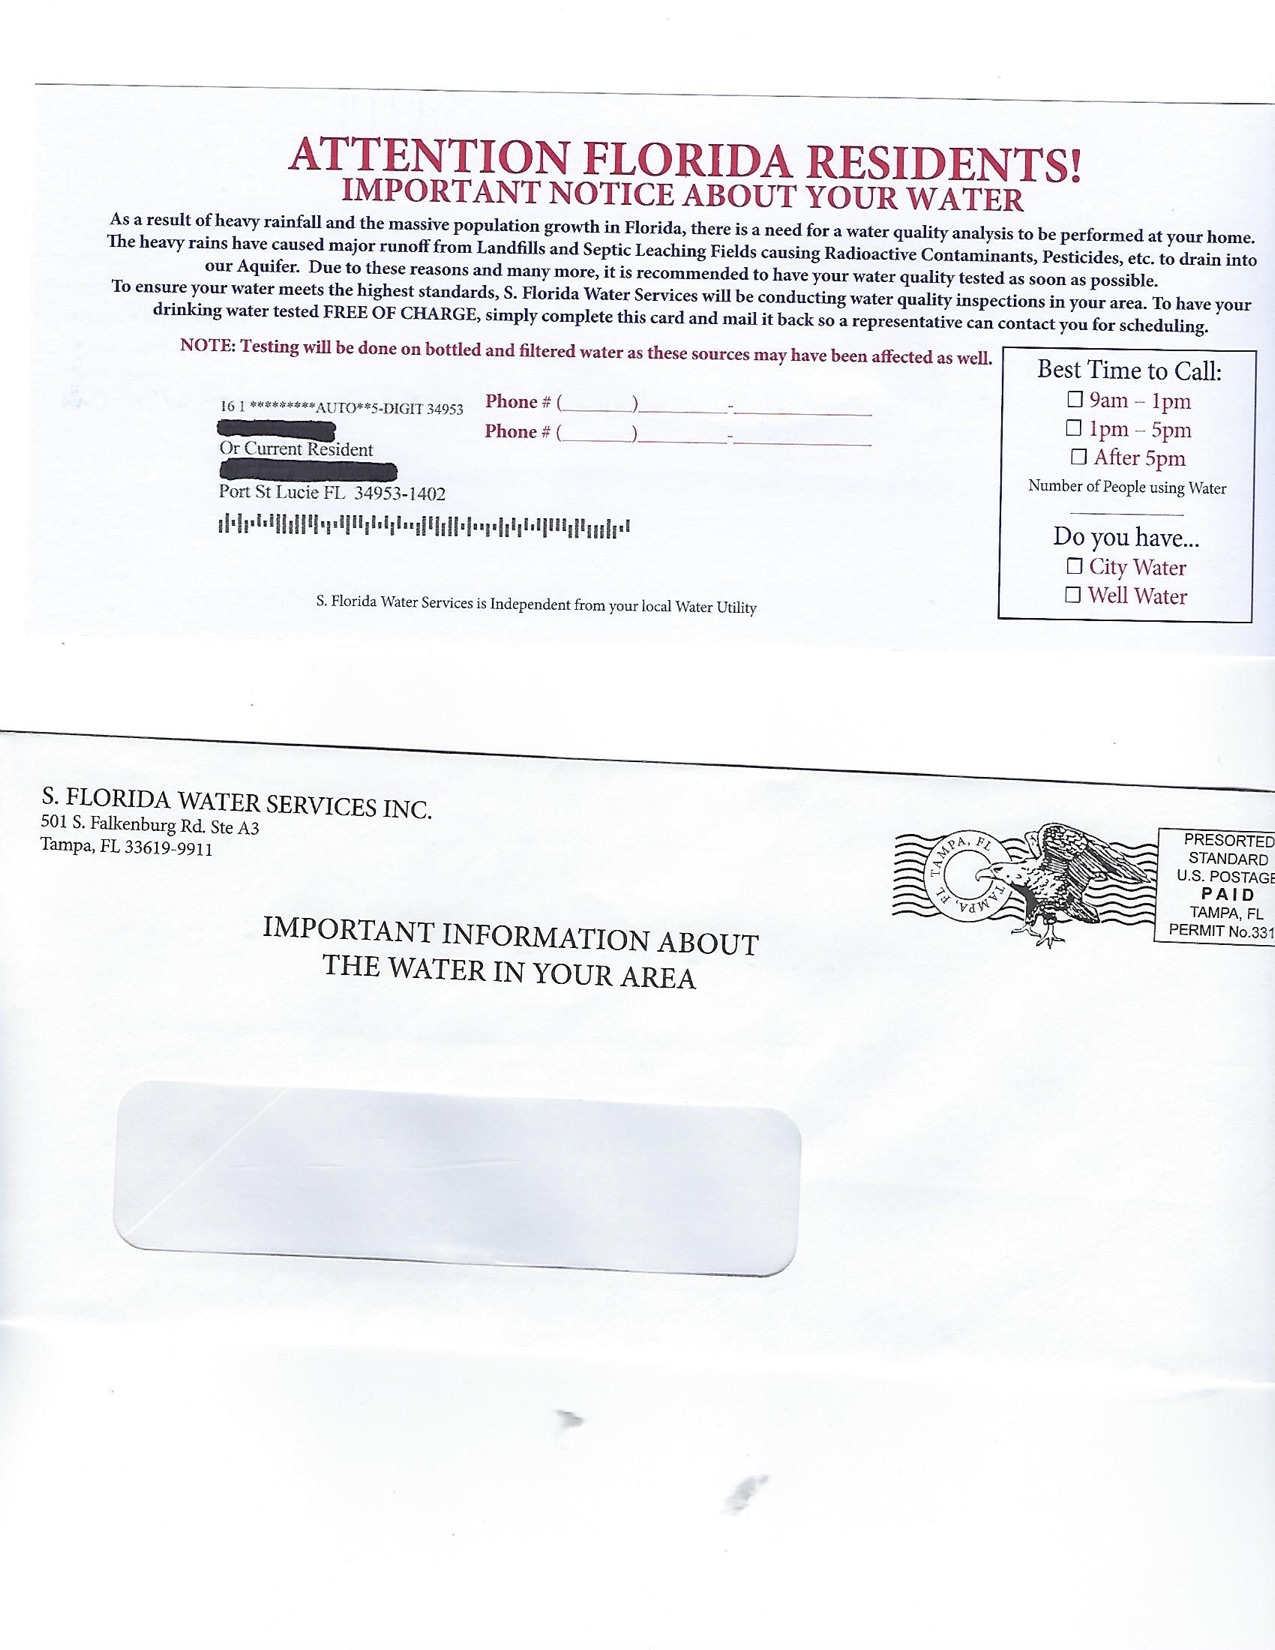 Actual letter to resident from private company questioning water quality